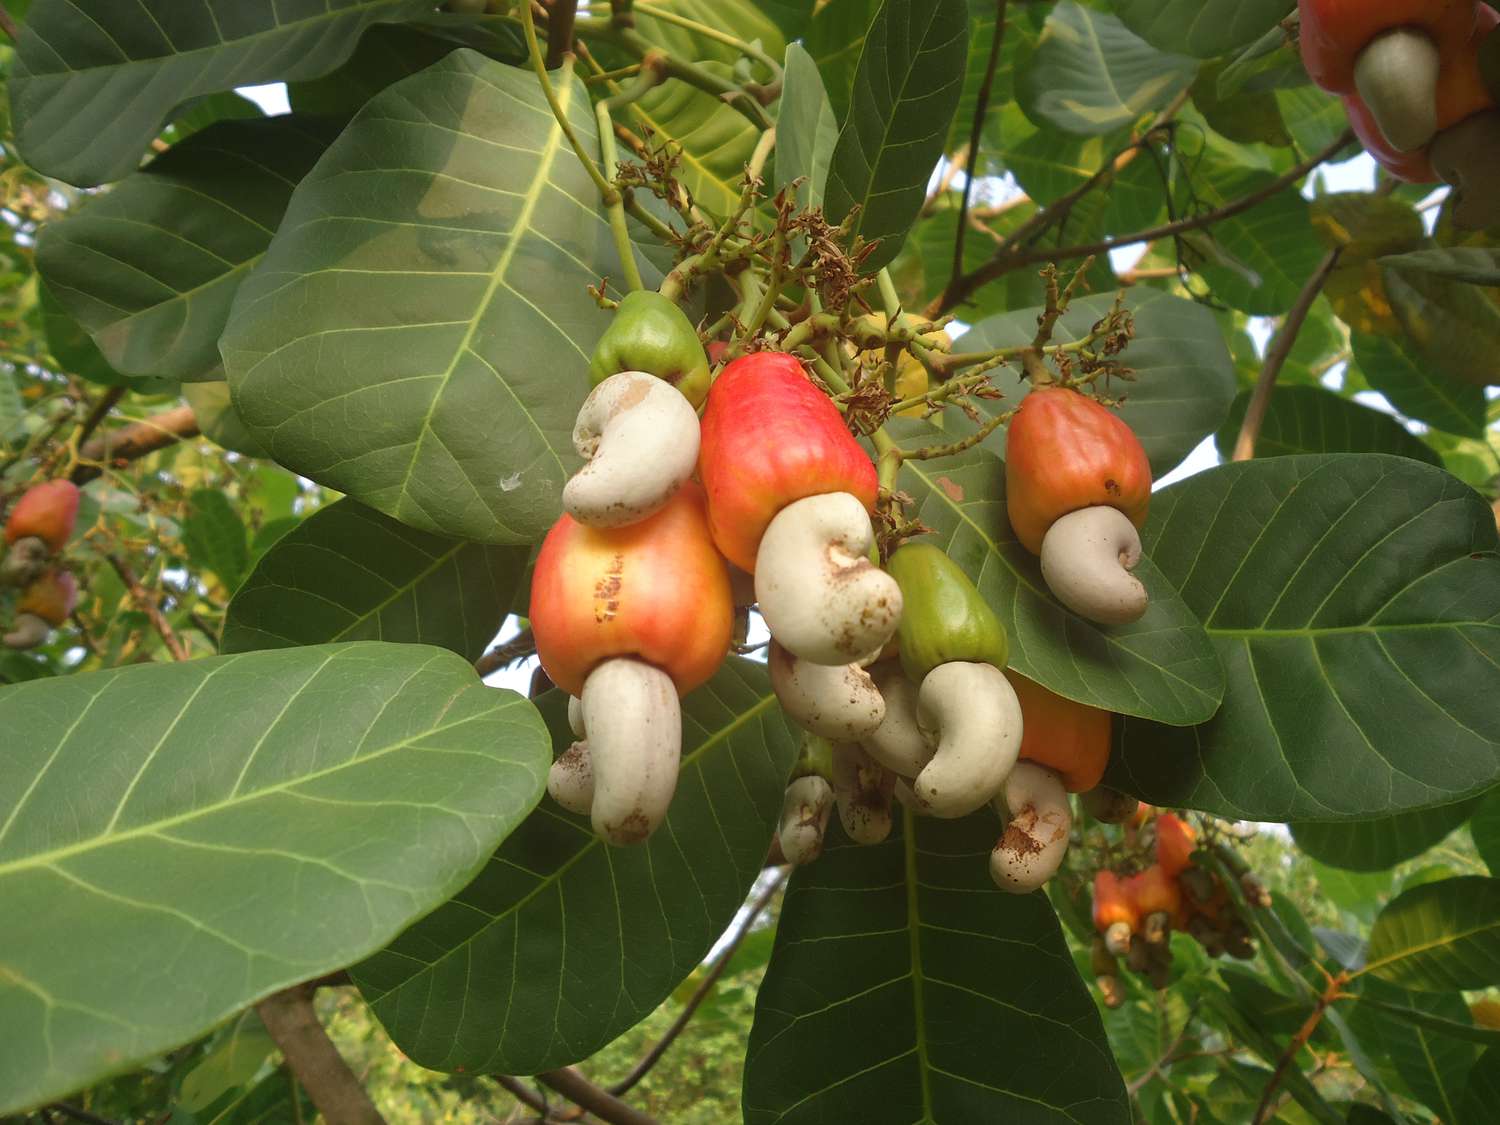 Cashews hanging on a tree